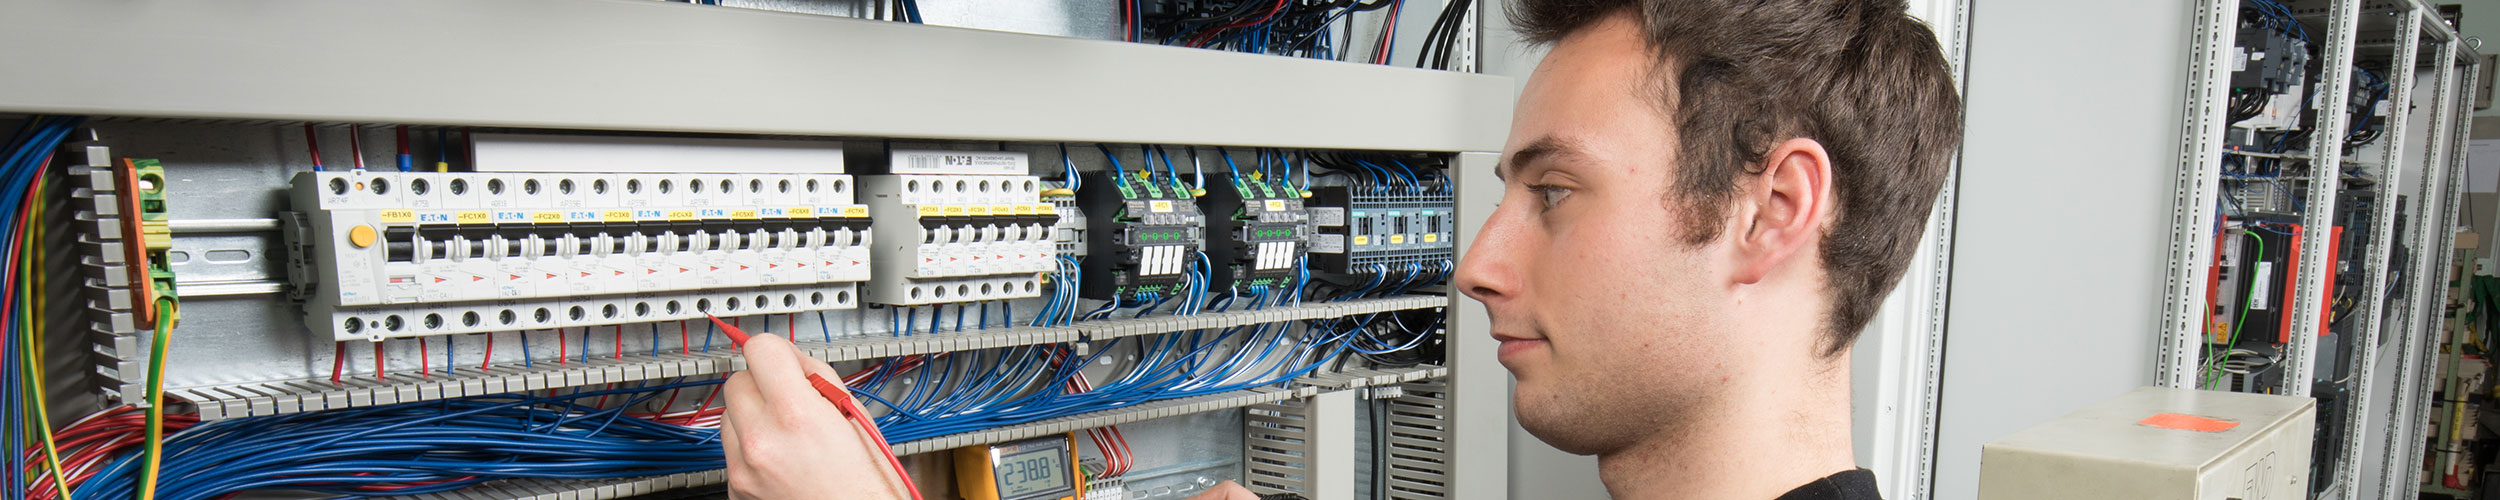 Training as an electronics technician for industrial engineering